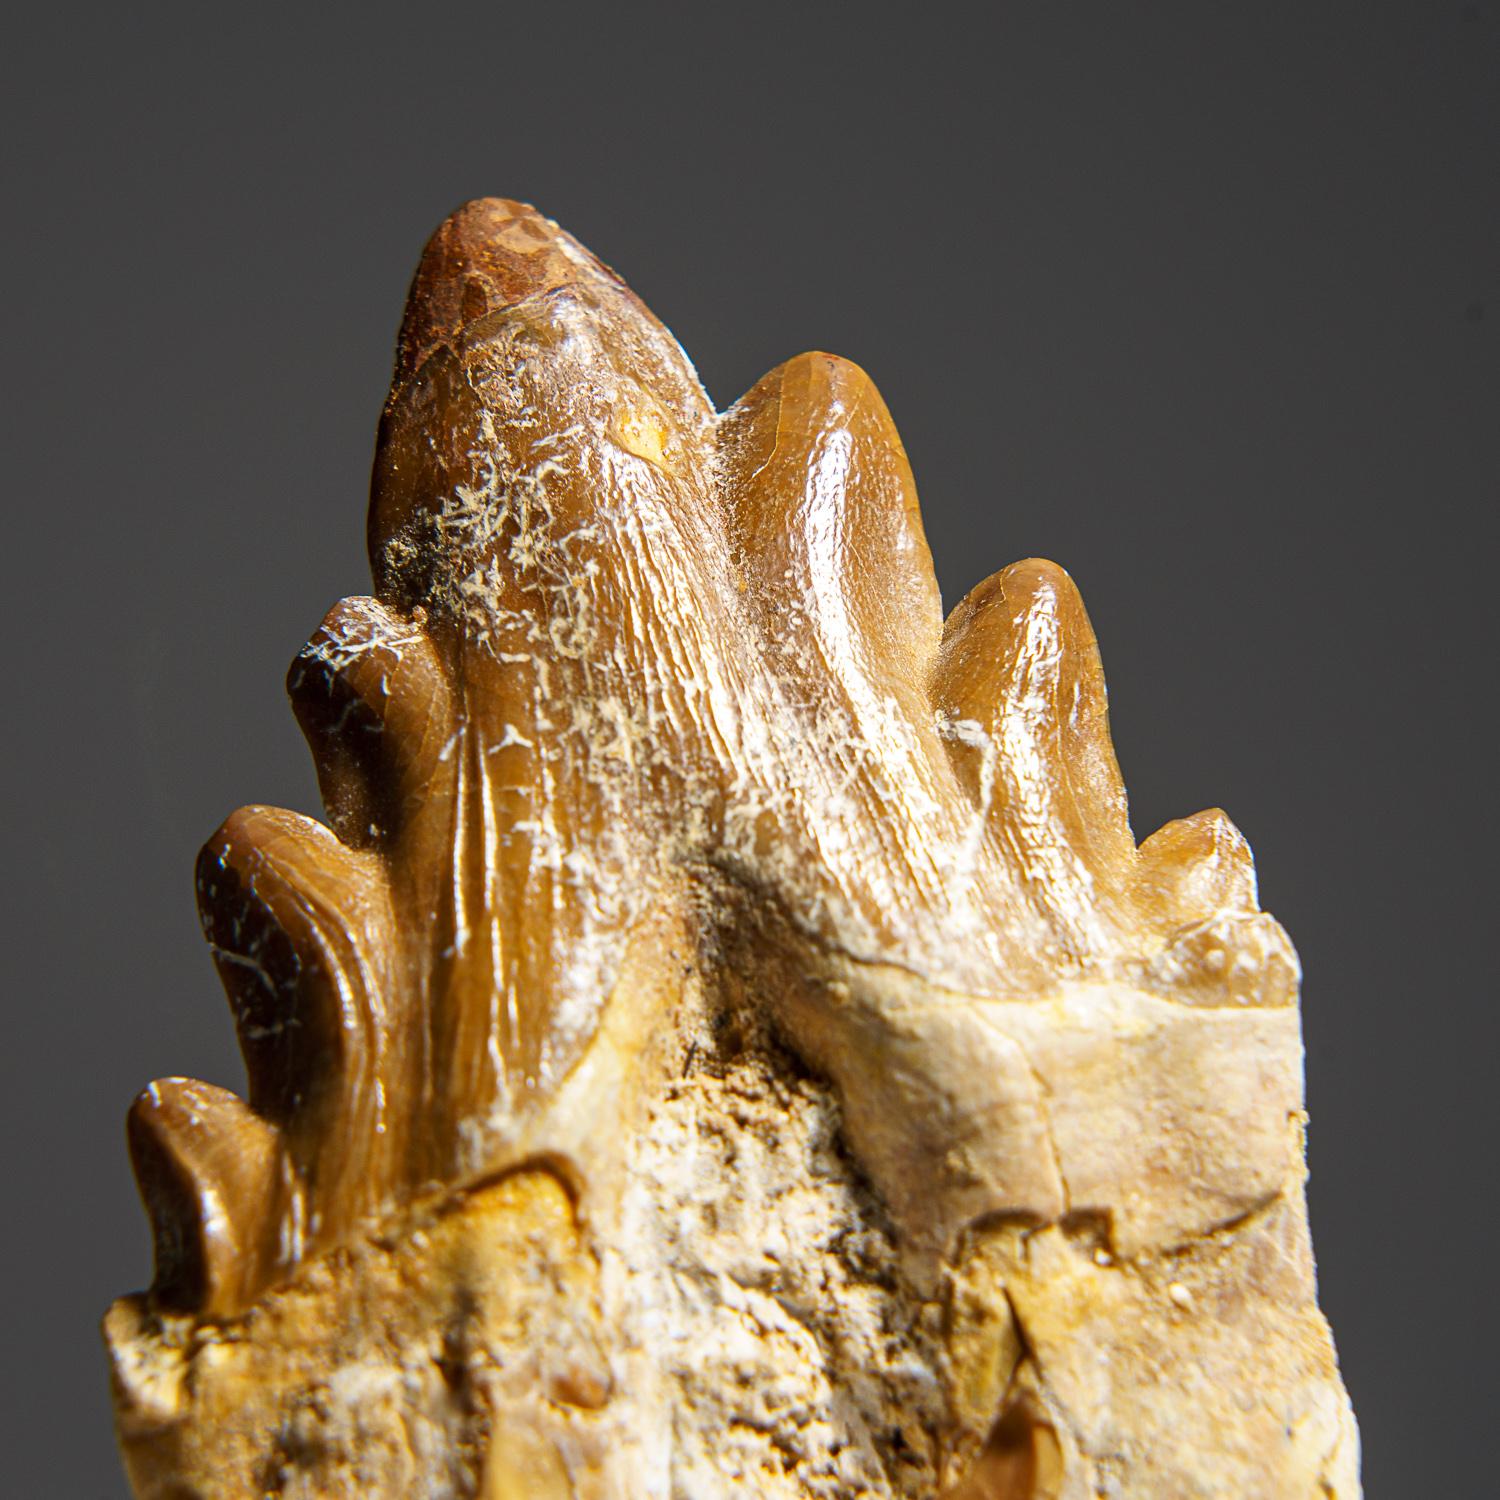 This well preserved tooth is 40 to 34 million years old from the Late Eocene Period. Basilosaurus was first thought to be a reptile but was later identified as a genus of ancient cetaceans. Unlike modern cetaceans, basilosaurus had various types of